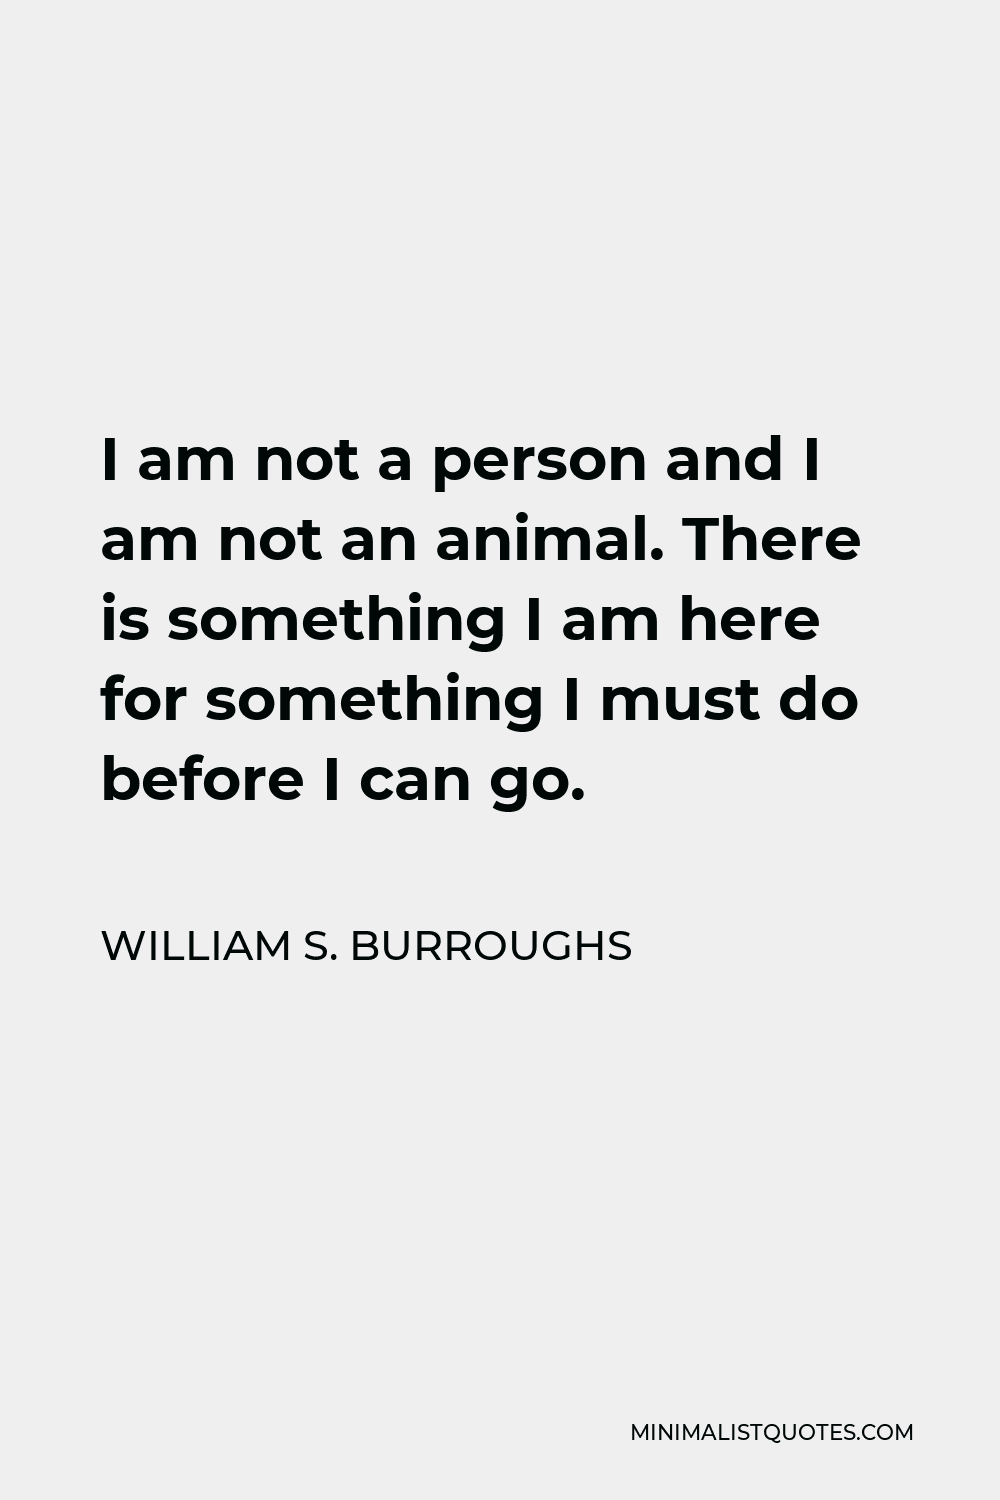 William S. Burroughs Quote - I am not a person and I am not an animal. There is something I am here for something I must do before I can go.